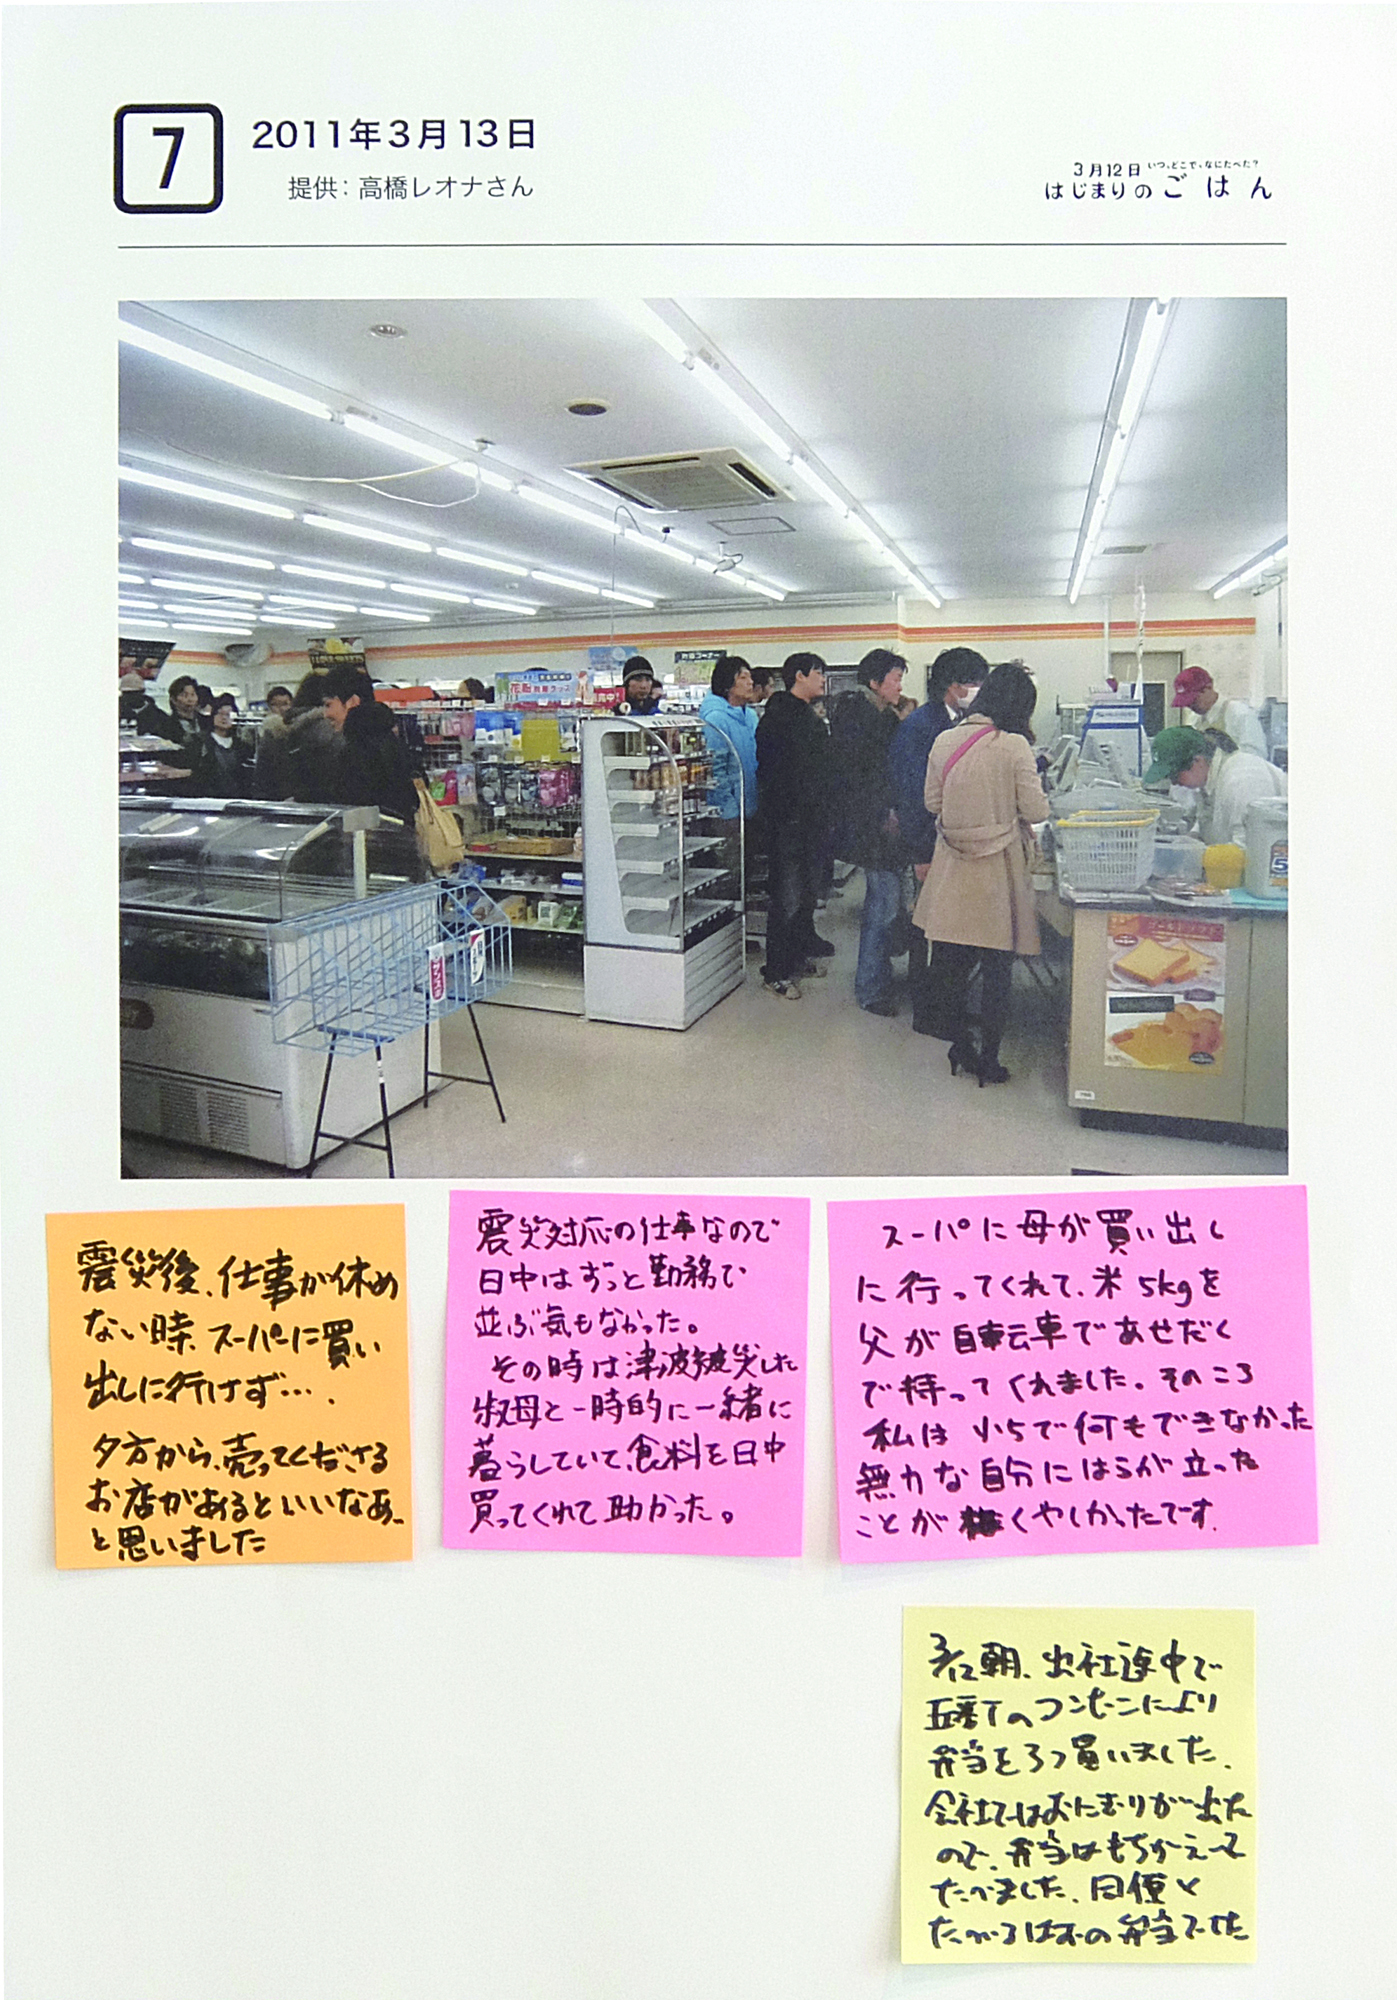 March 12: The First Meal After the Earthquake/Convenience stores and s...